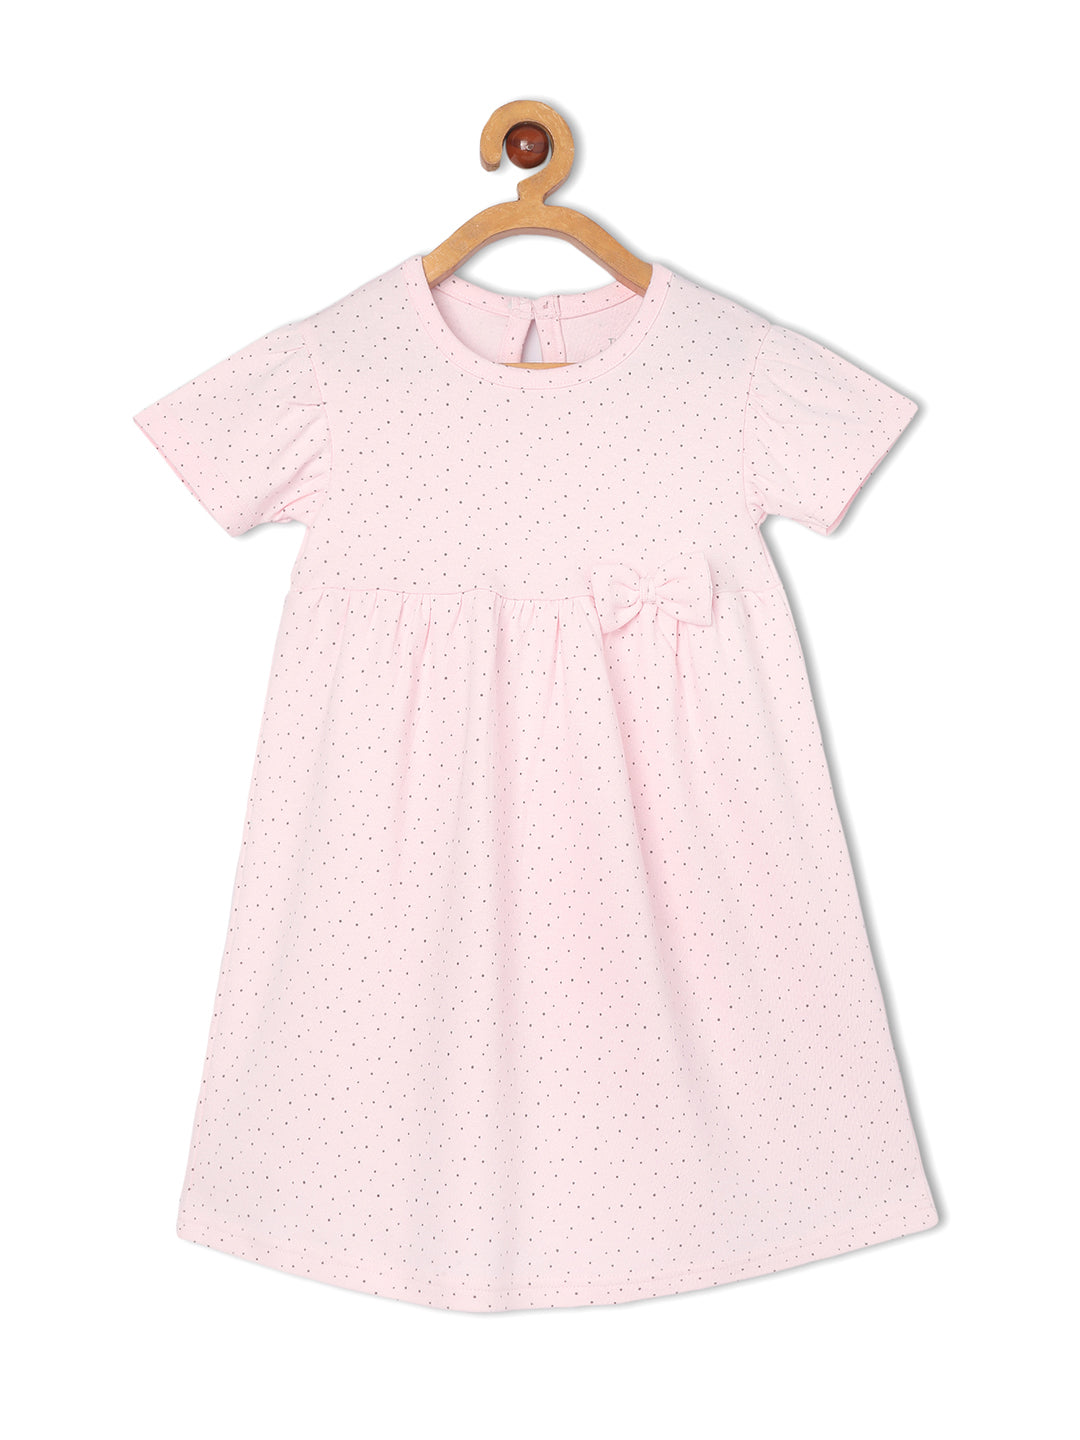 Polka Dotted Girls Casual Dress